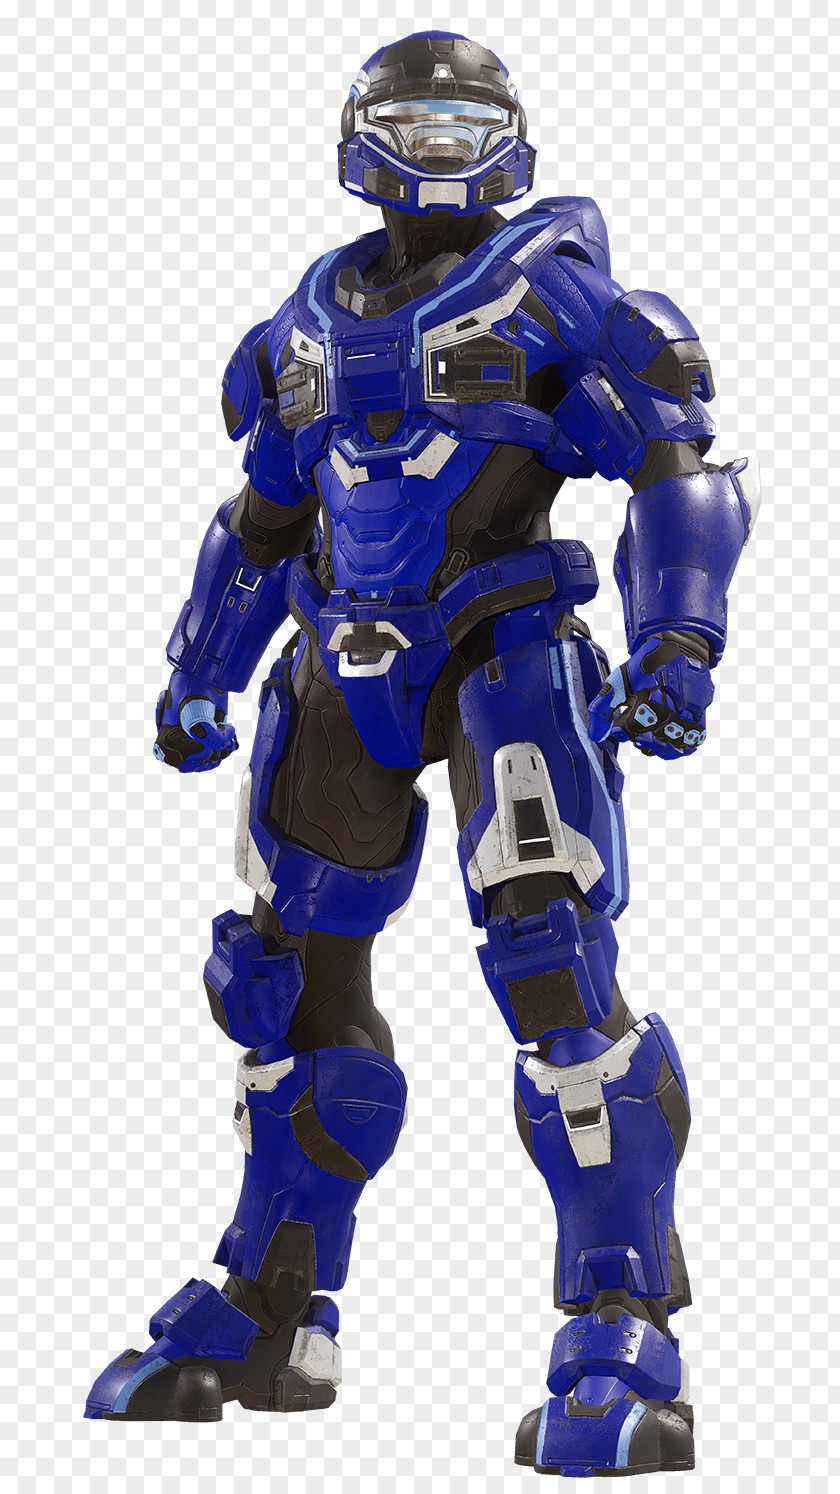 Halo 5: Guardians Halo: Reach Master Chief Combat Evolved 4 PNG